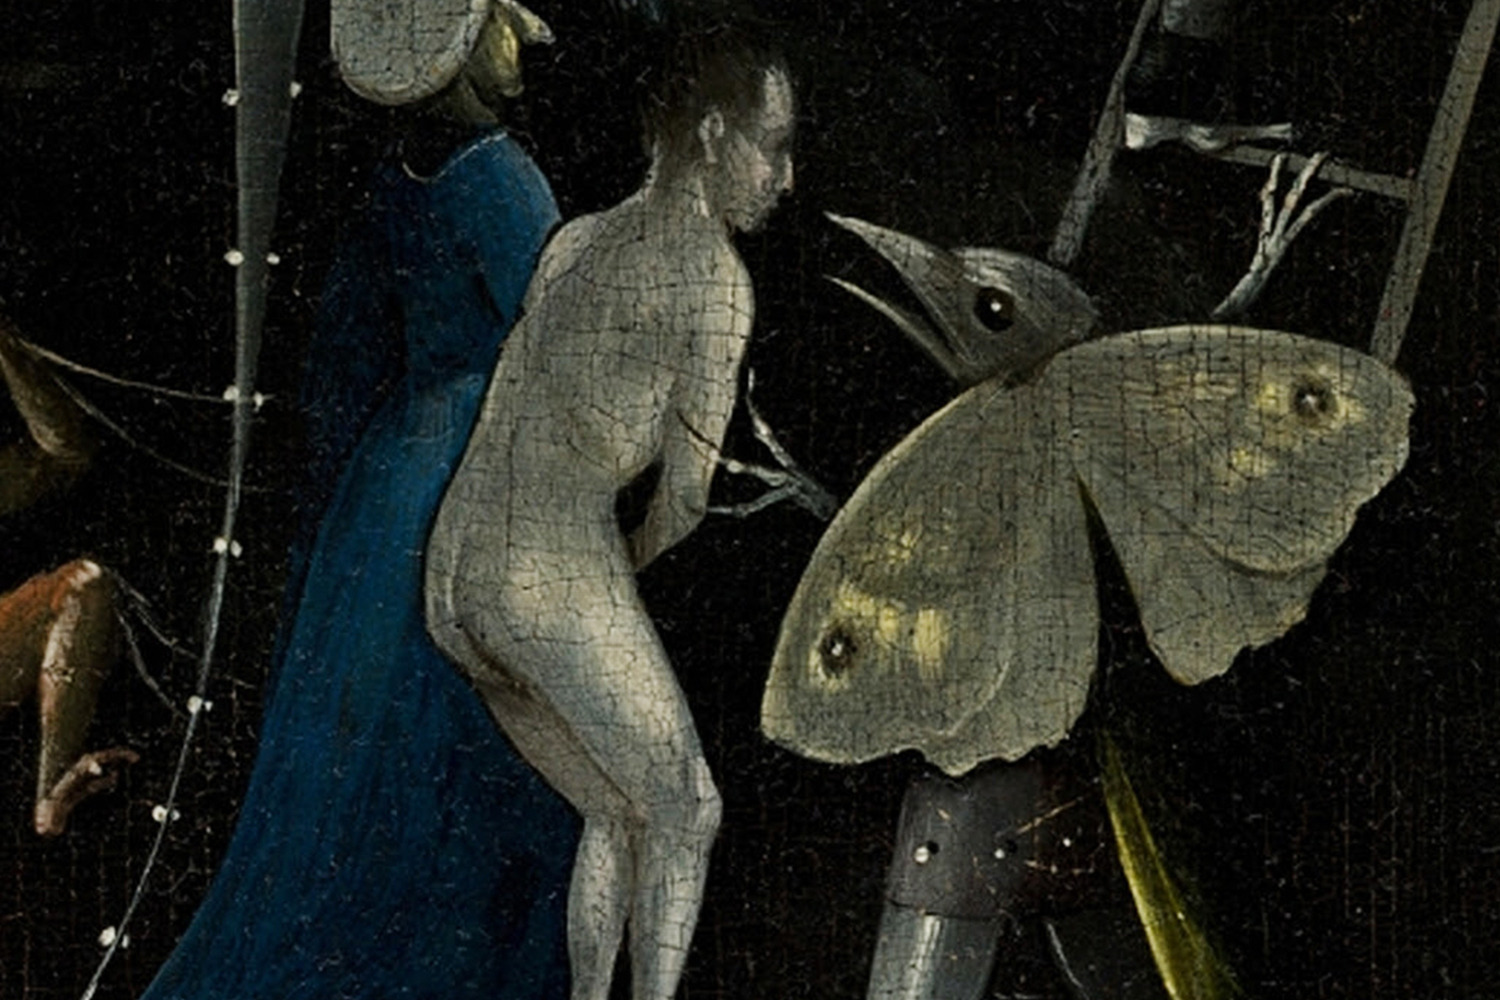  The butterfly monster in “The Garden of Earthly Delights” (detail),&nbsp;Hieronymus Bosch, ca. 1500   